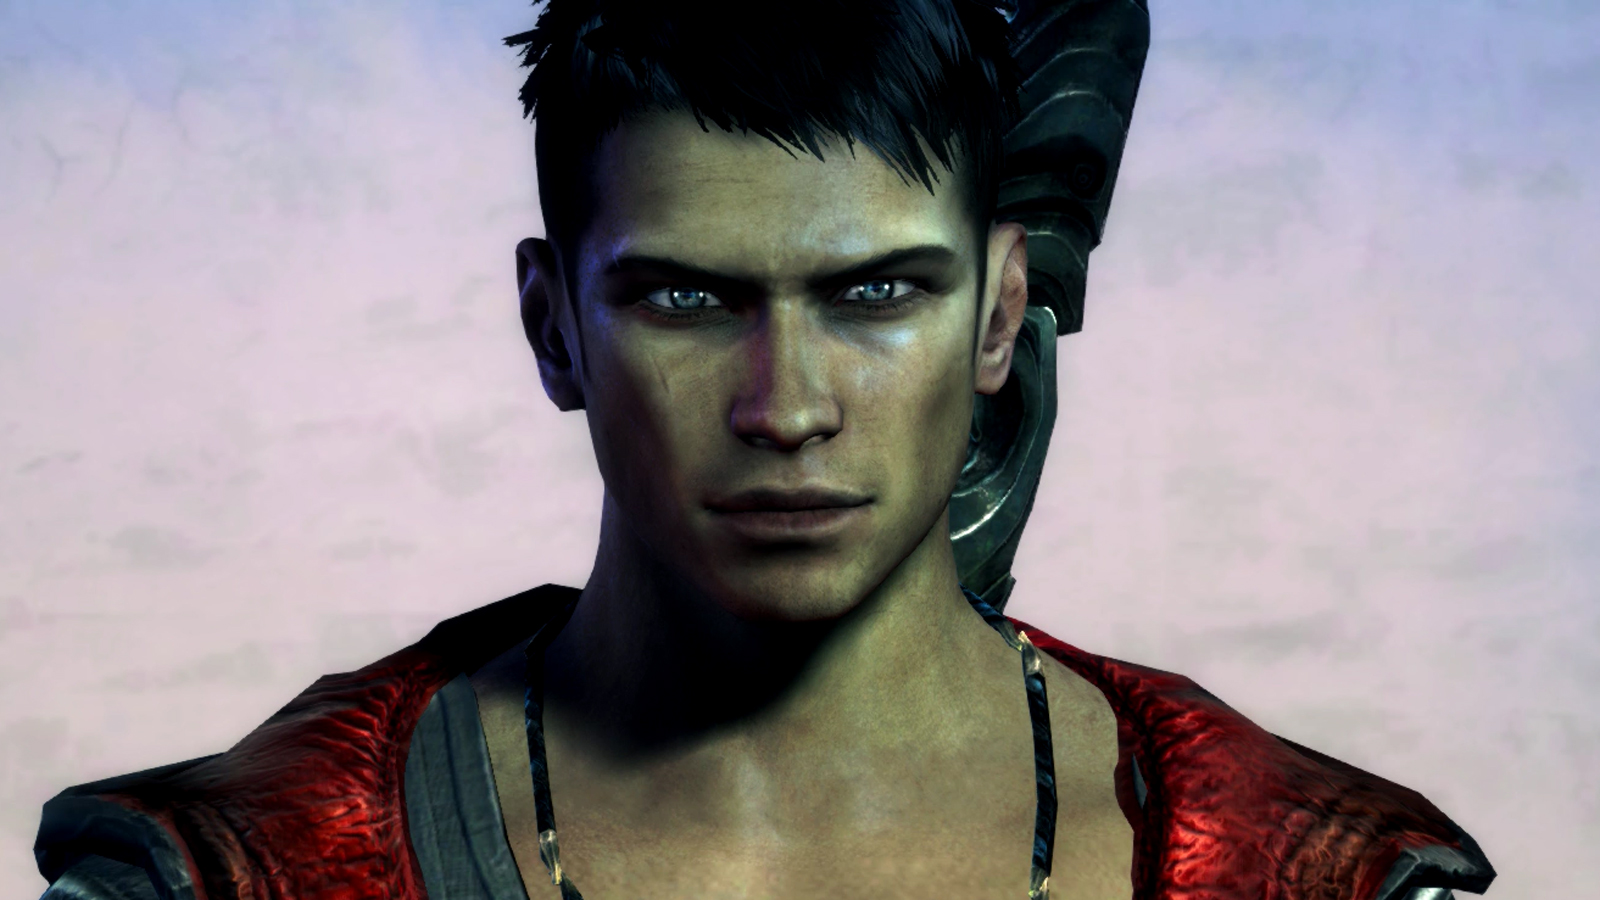 Play as Dante's twin brother in DmC's post launch DLC Vergil's